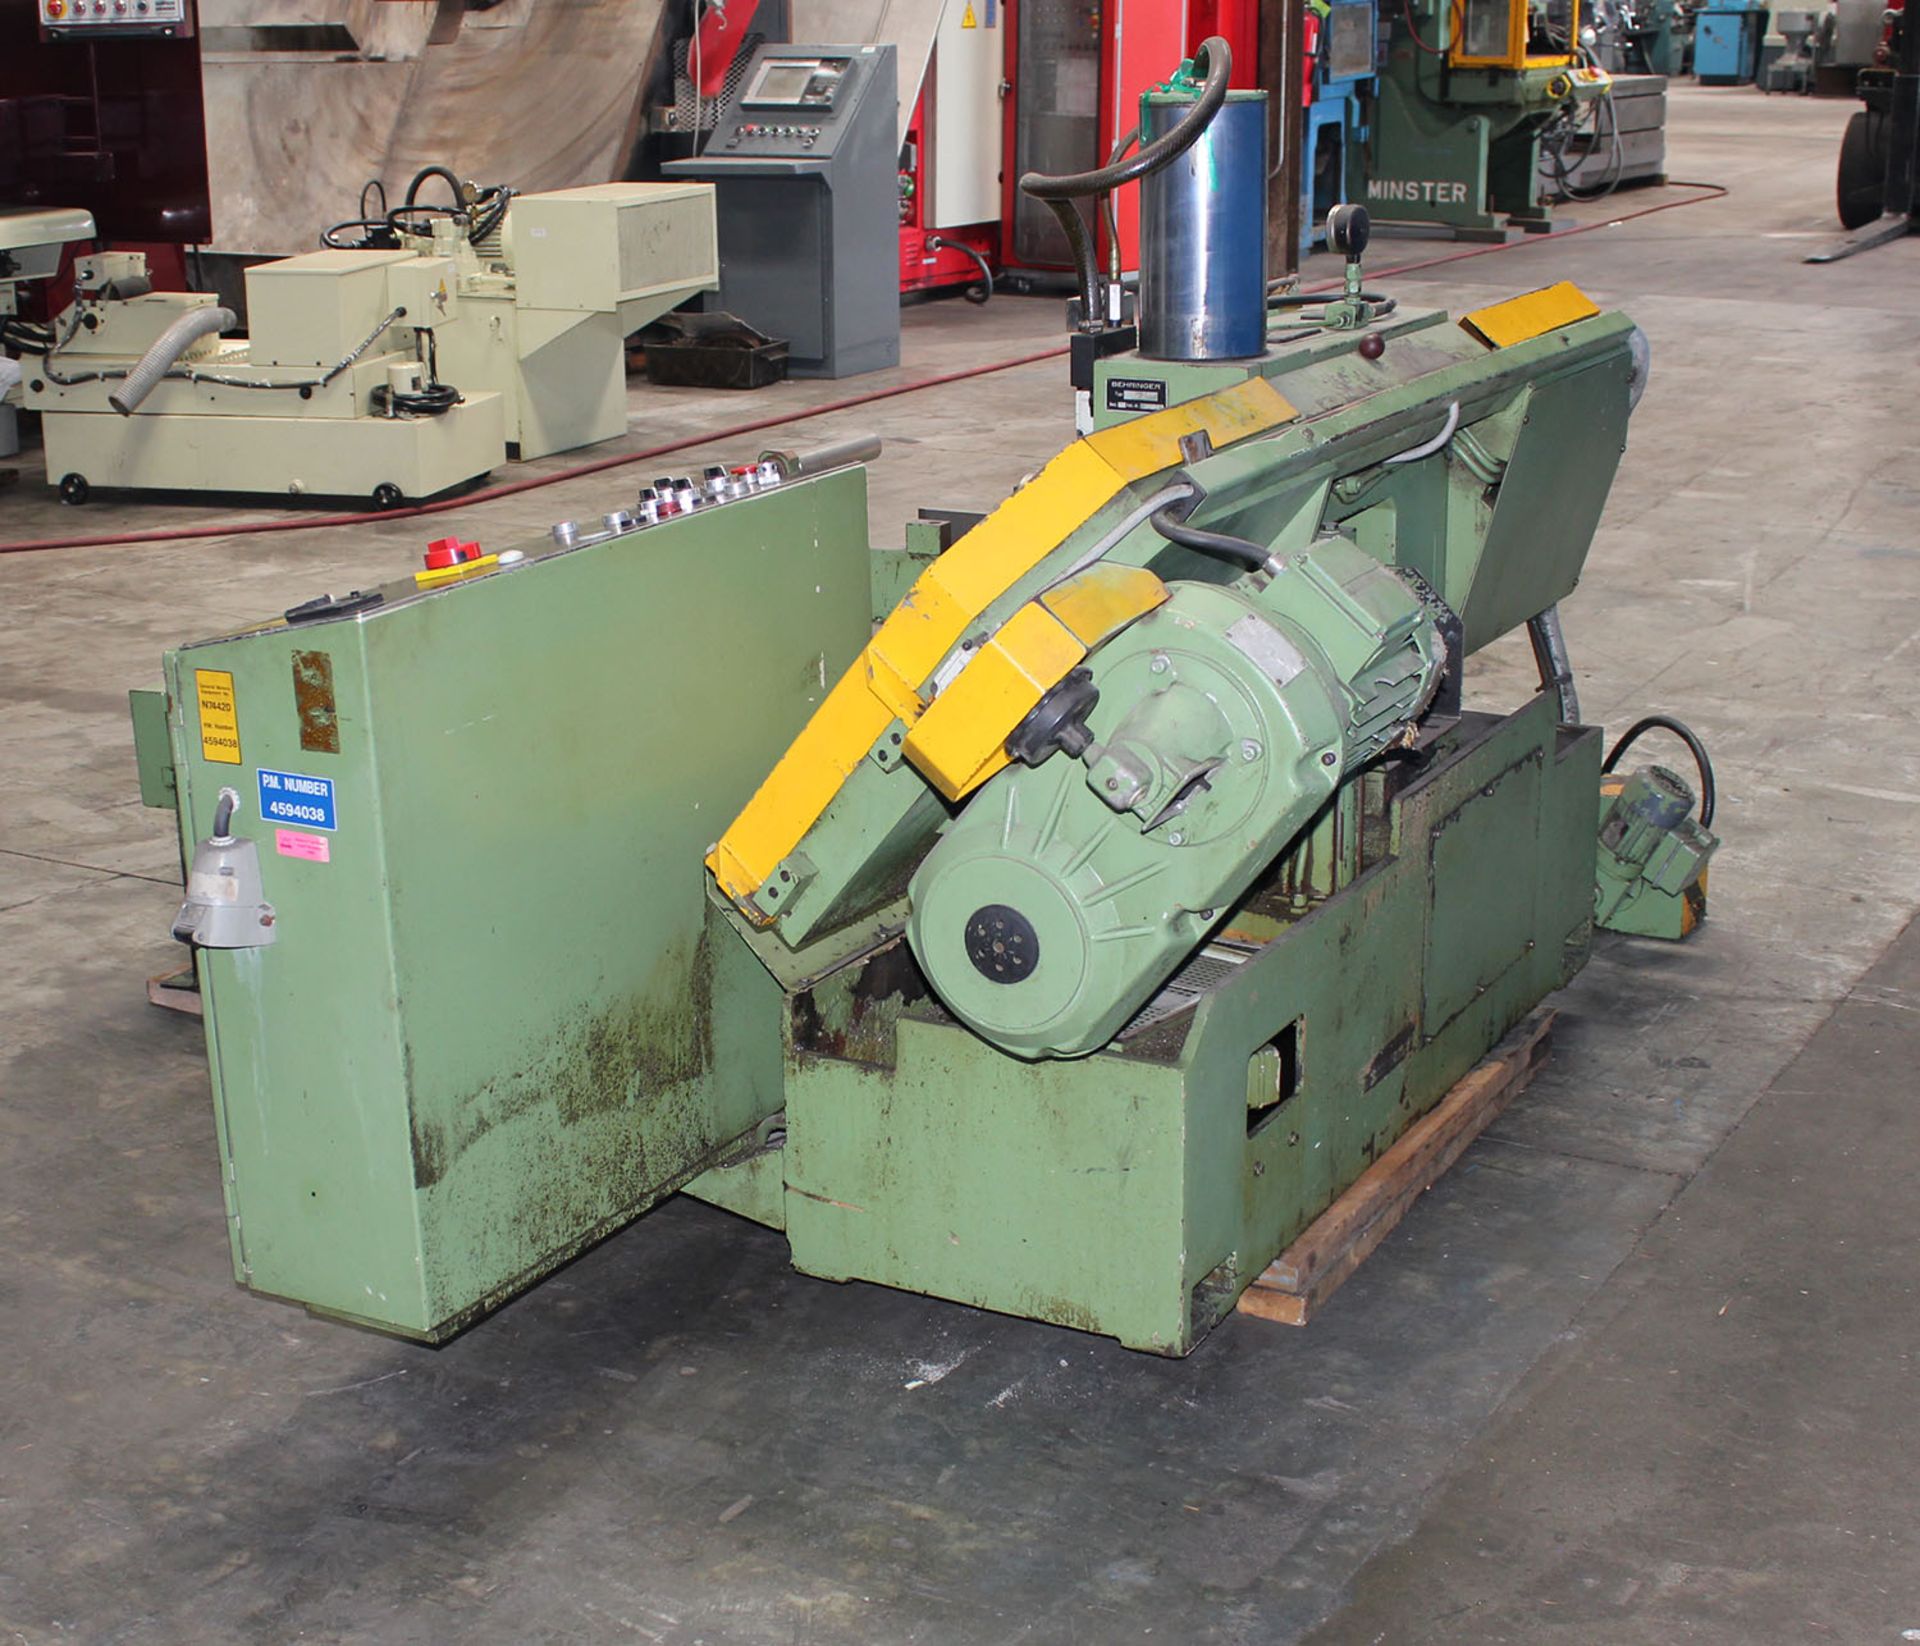 12'' x 10" Behringer Auto. Horiz. Metal Cutting Band Saw - Located In: Huntington Park, CA - Image 4 of 7